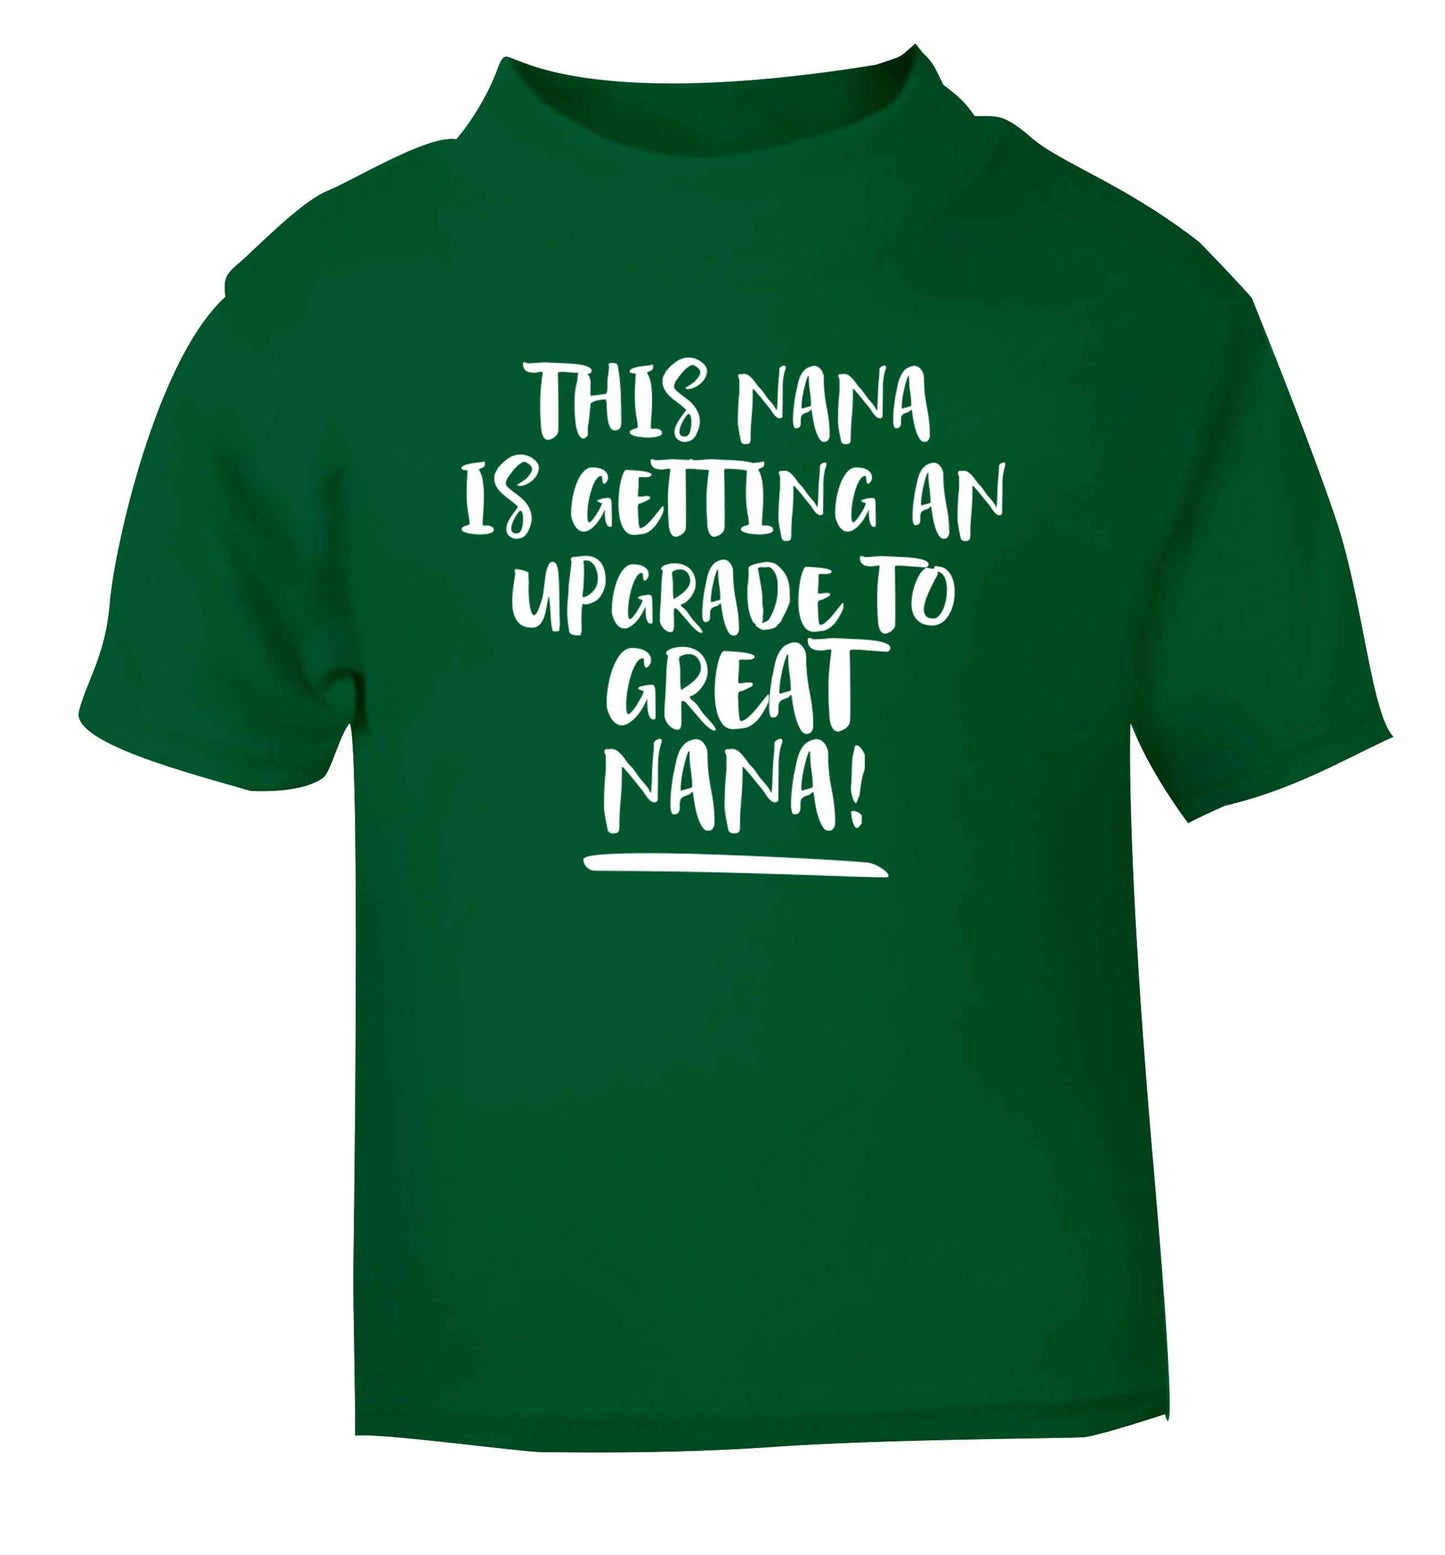 This nana is getting an upgrade to great nana! green Baby Toddler Tshirt 2 Years